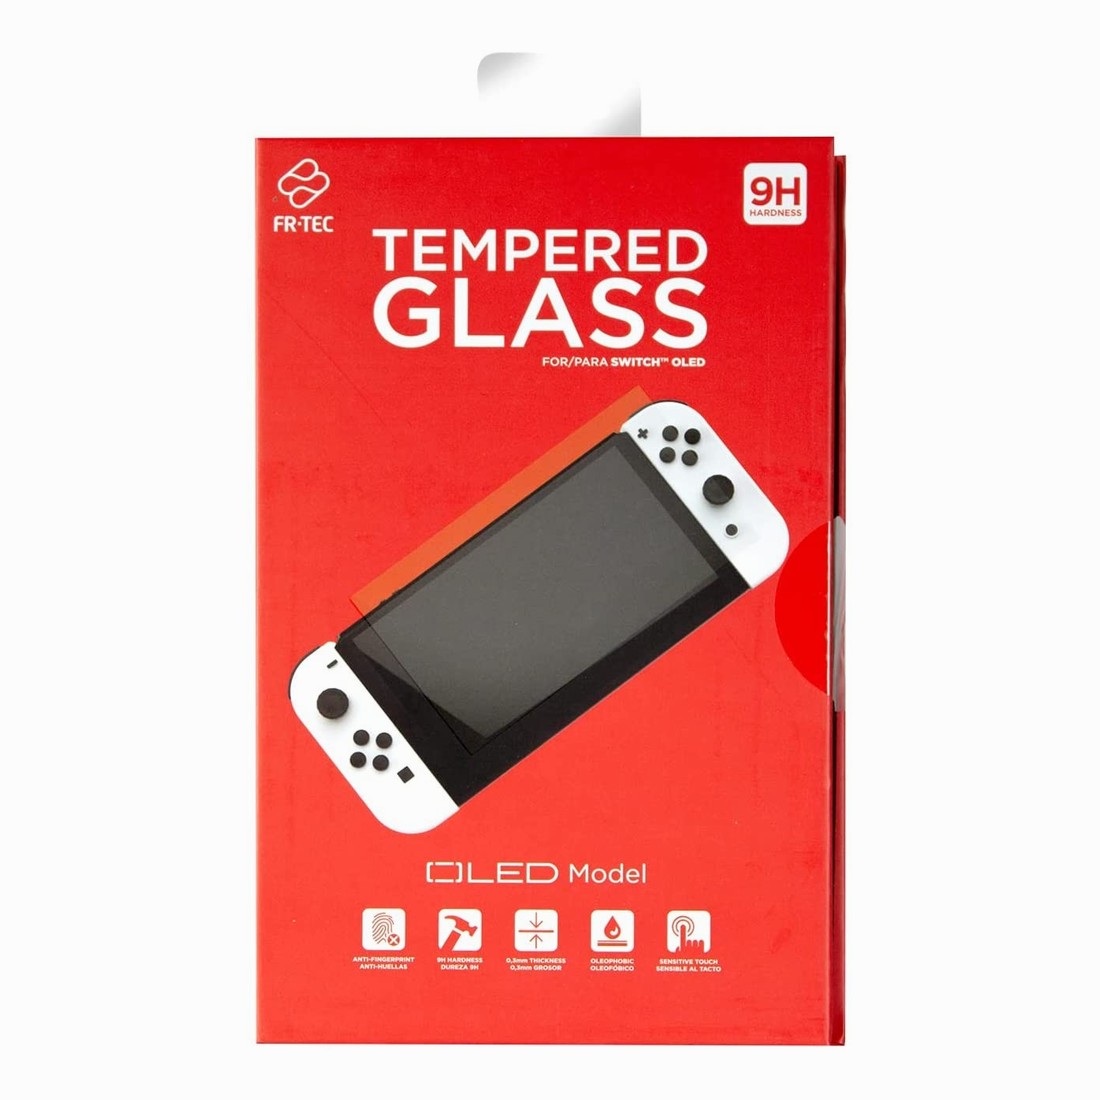 FR-TEC Tempered Glass Screen Protector for Nintendo Switch OLED